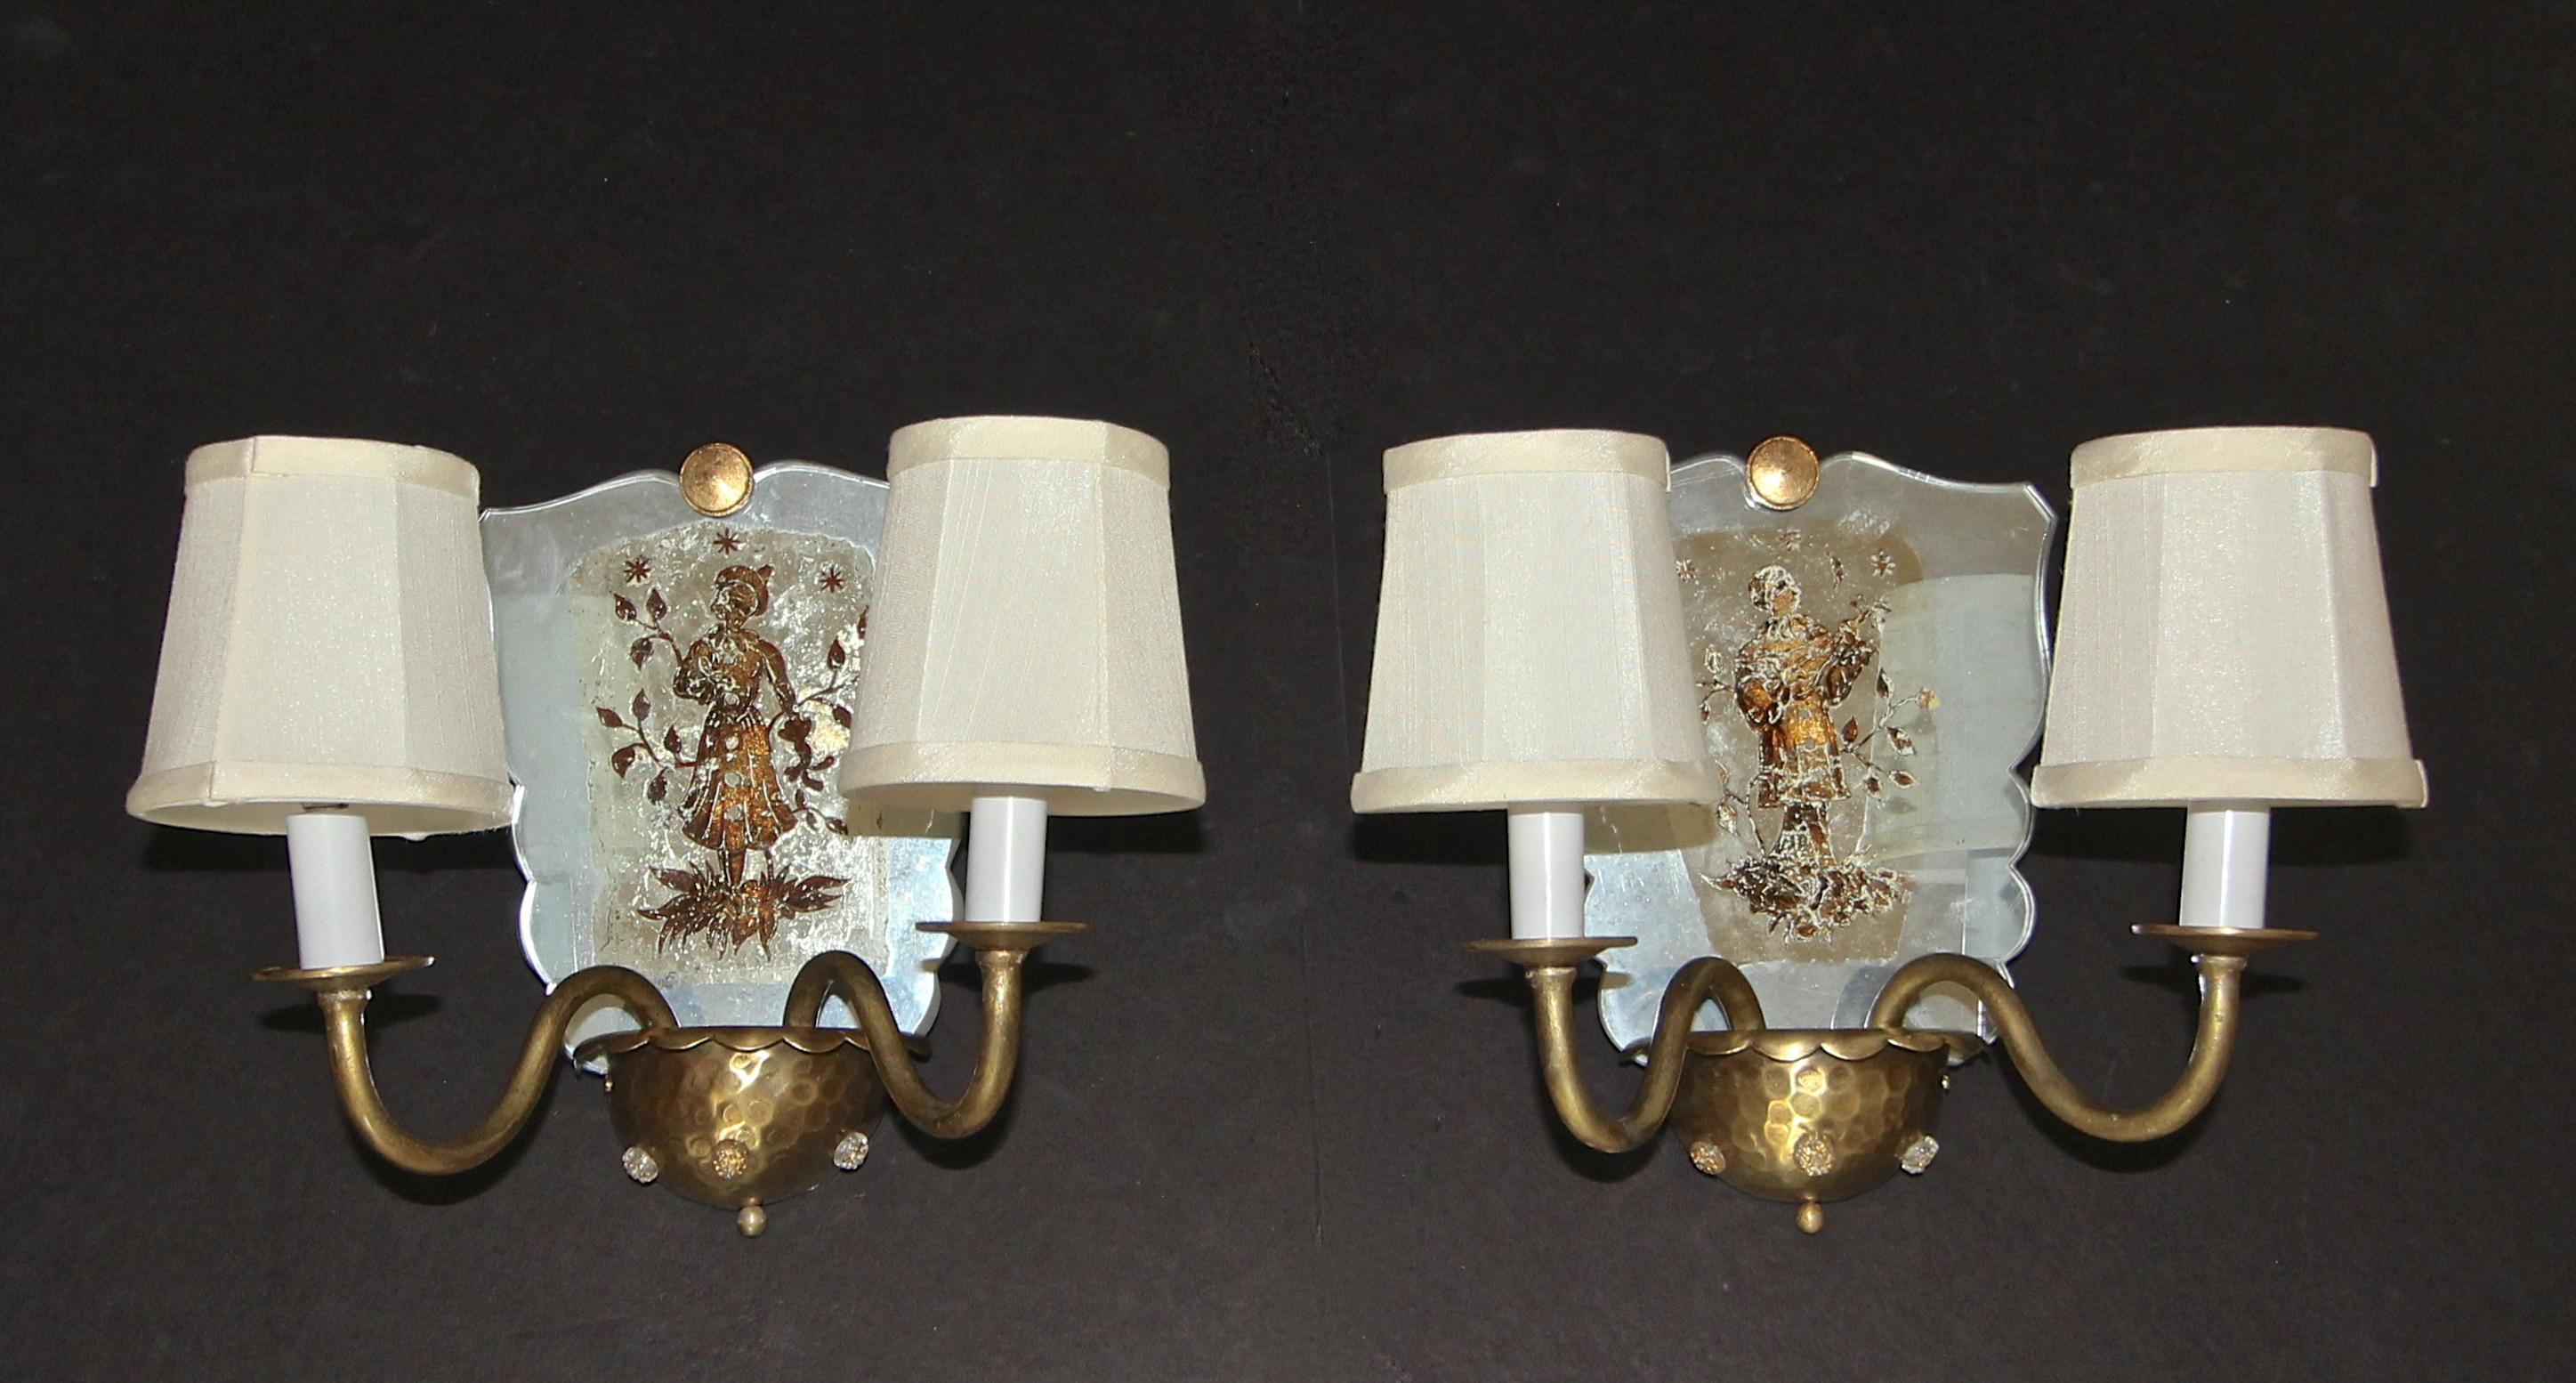 Pair of Venetian Italian Mirrored Wall Light Sconces For Sale 11